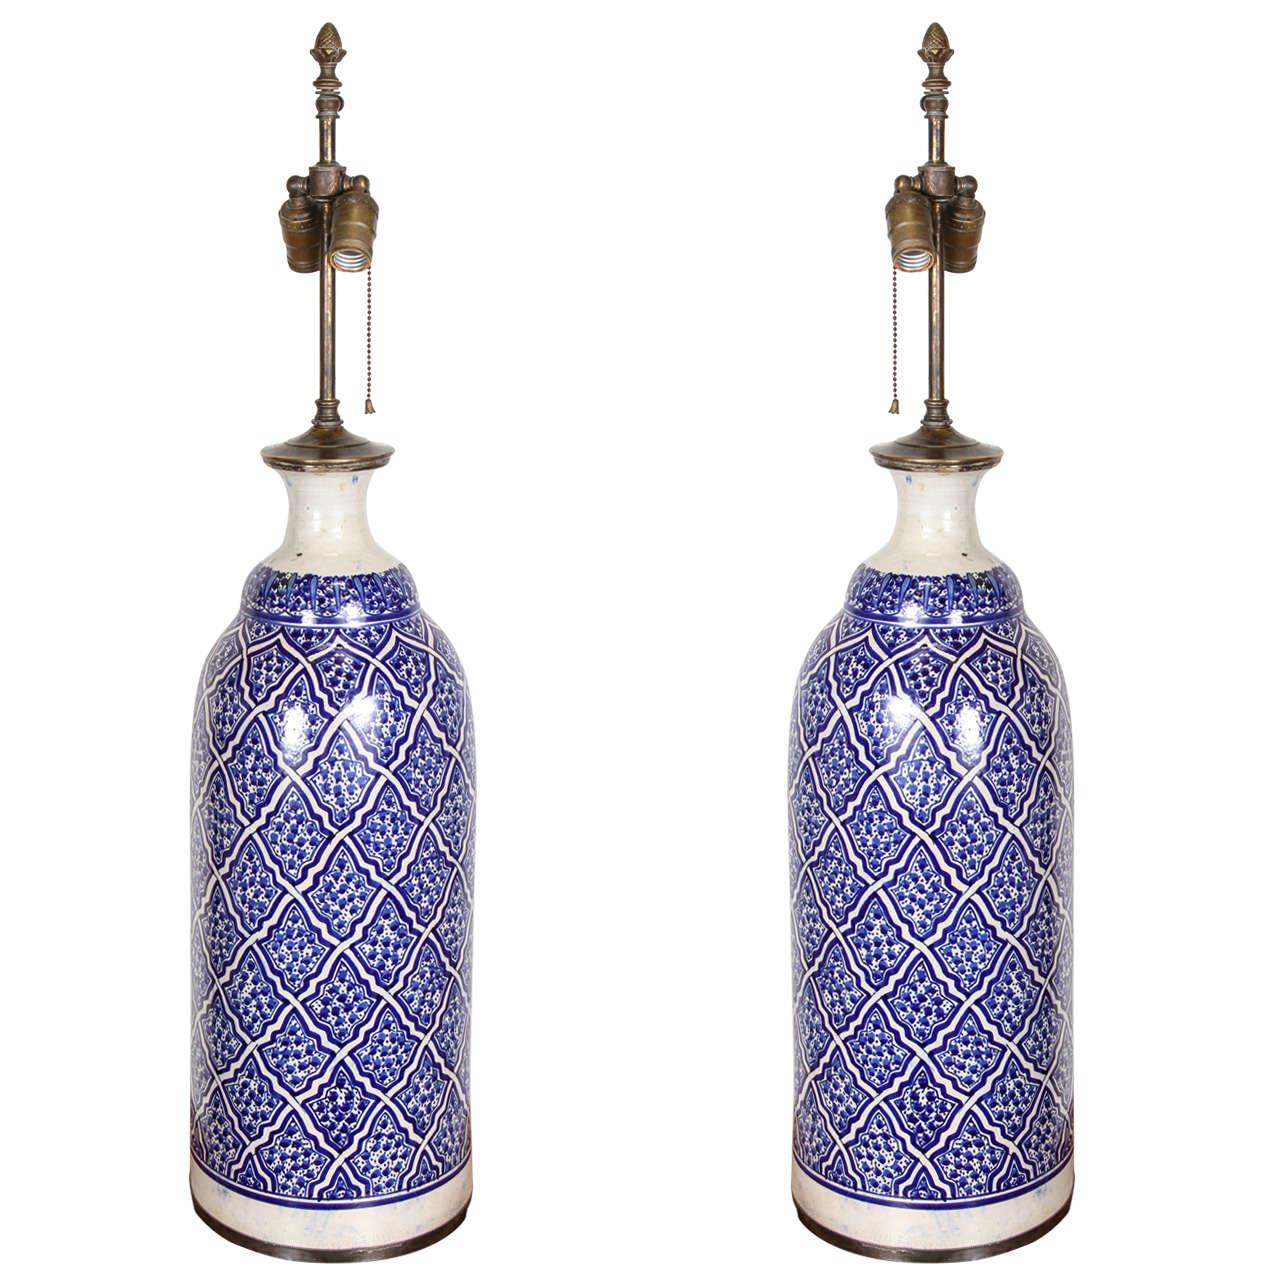 Moroccan Ceramic Table Lamps from Fez